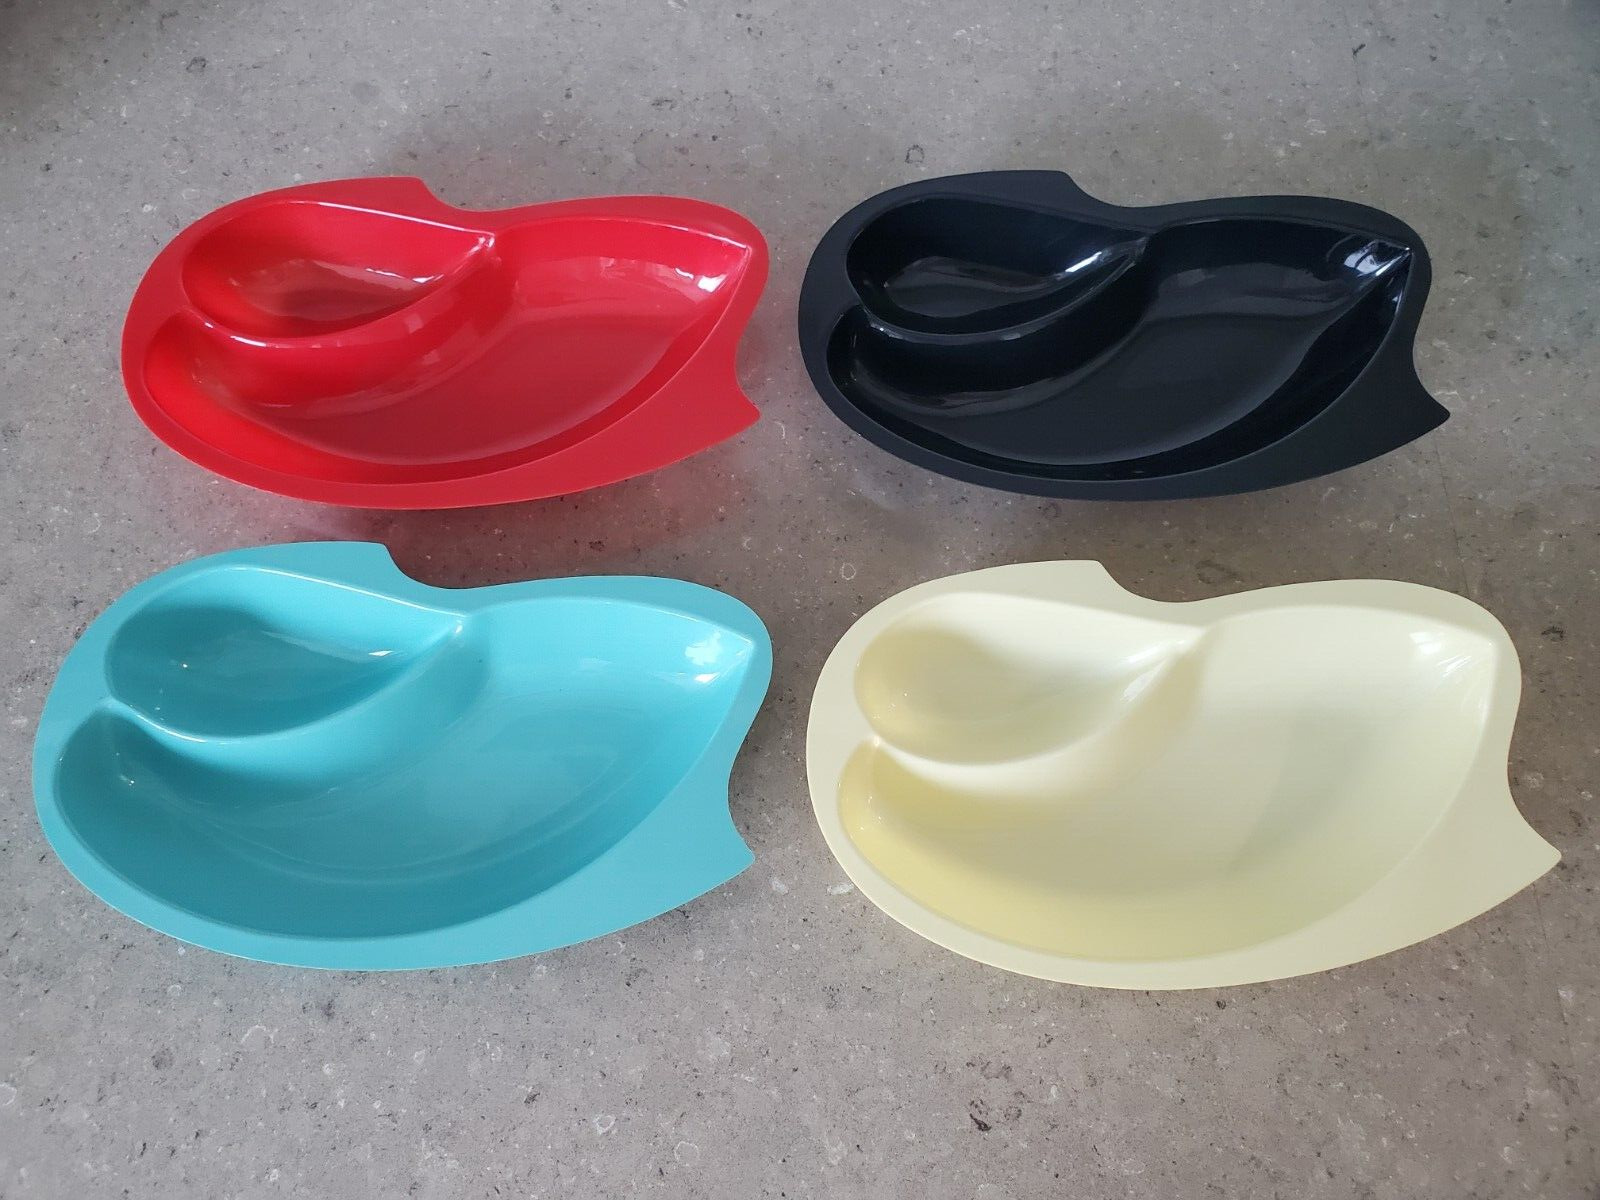 Vintage MCM Stackable Plastic Snack Trays - Set of 4 - Aqua Red Black Yellow